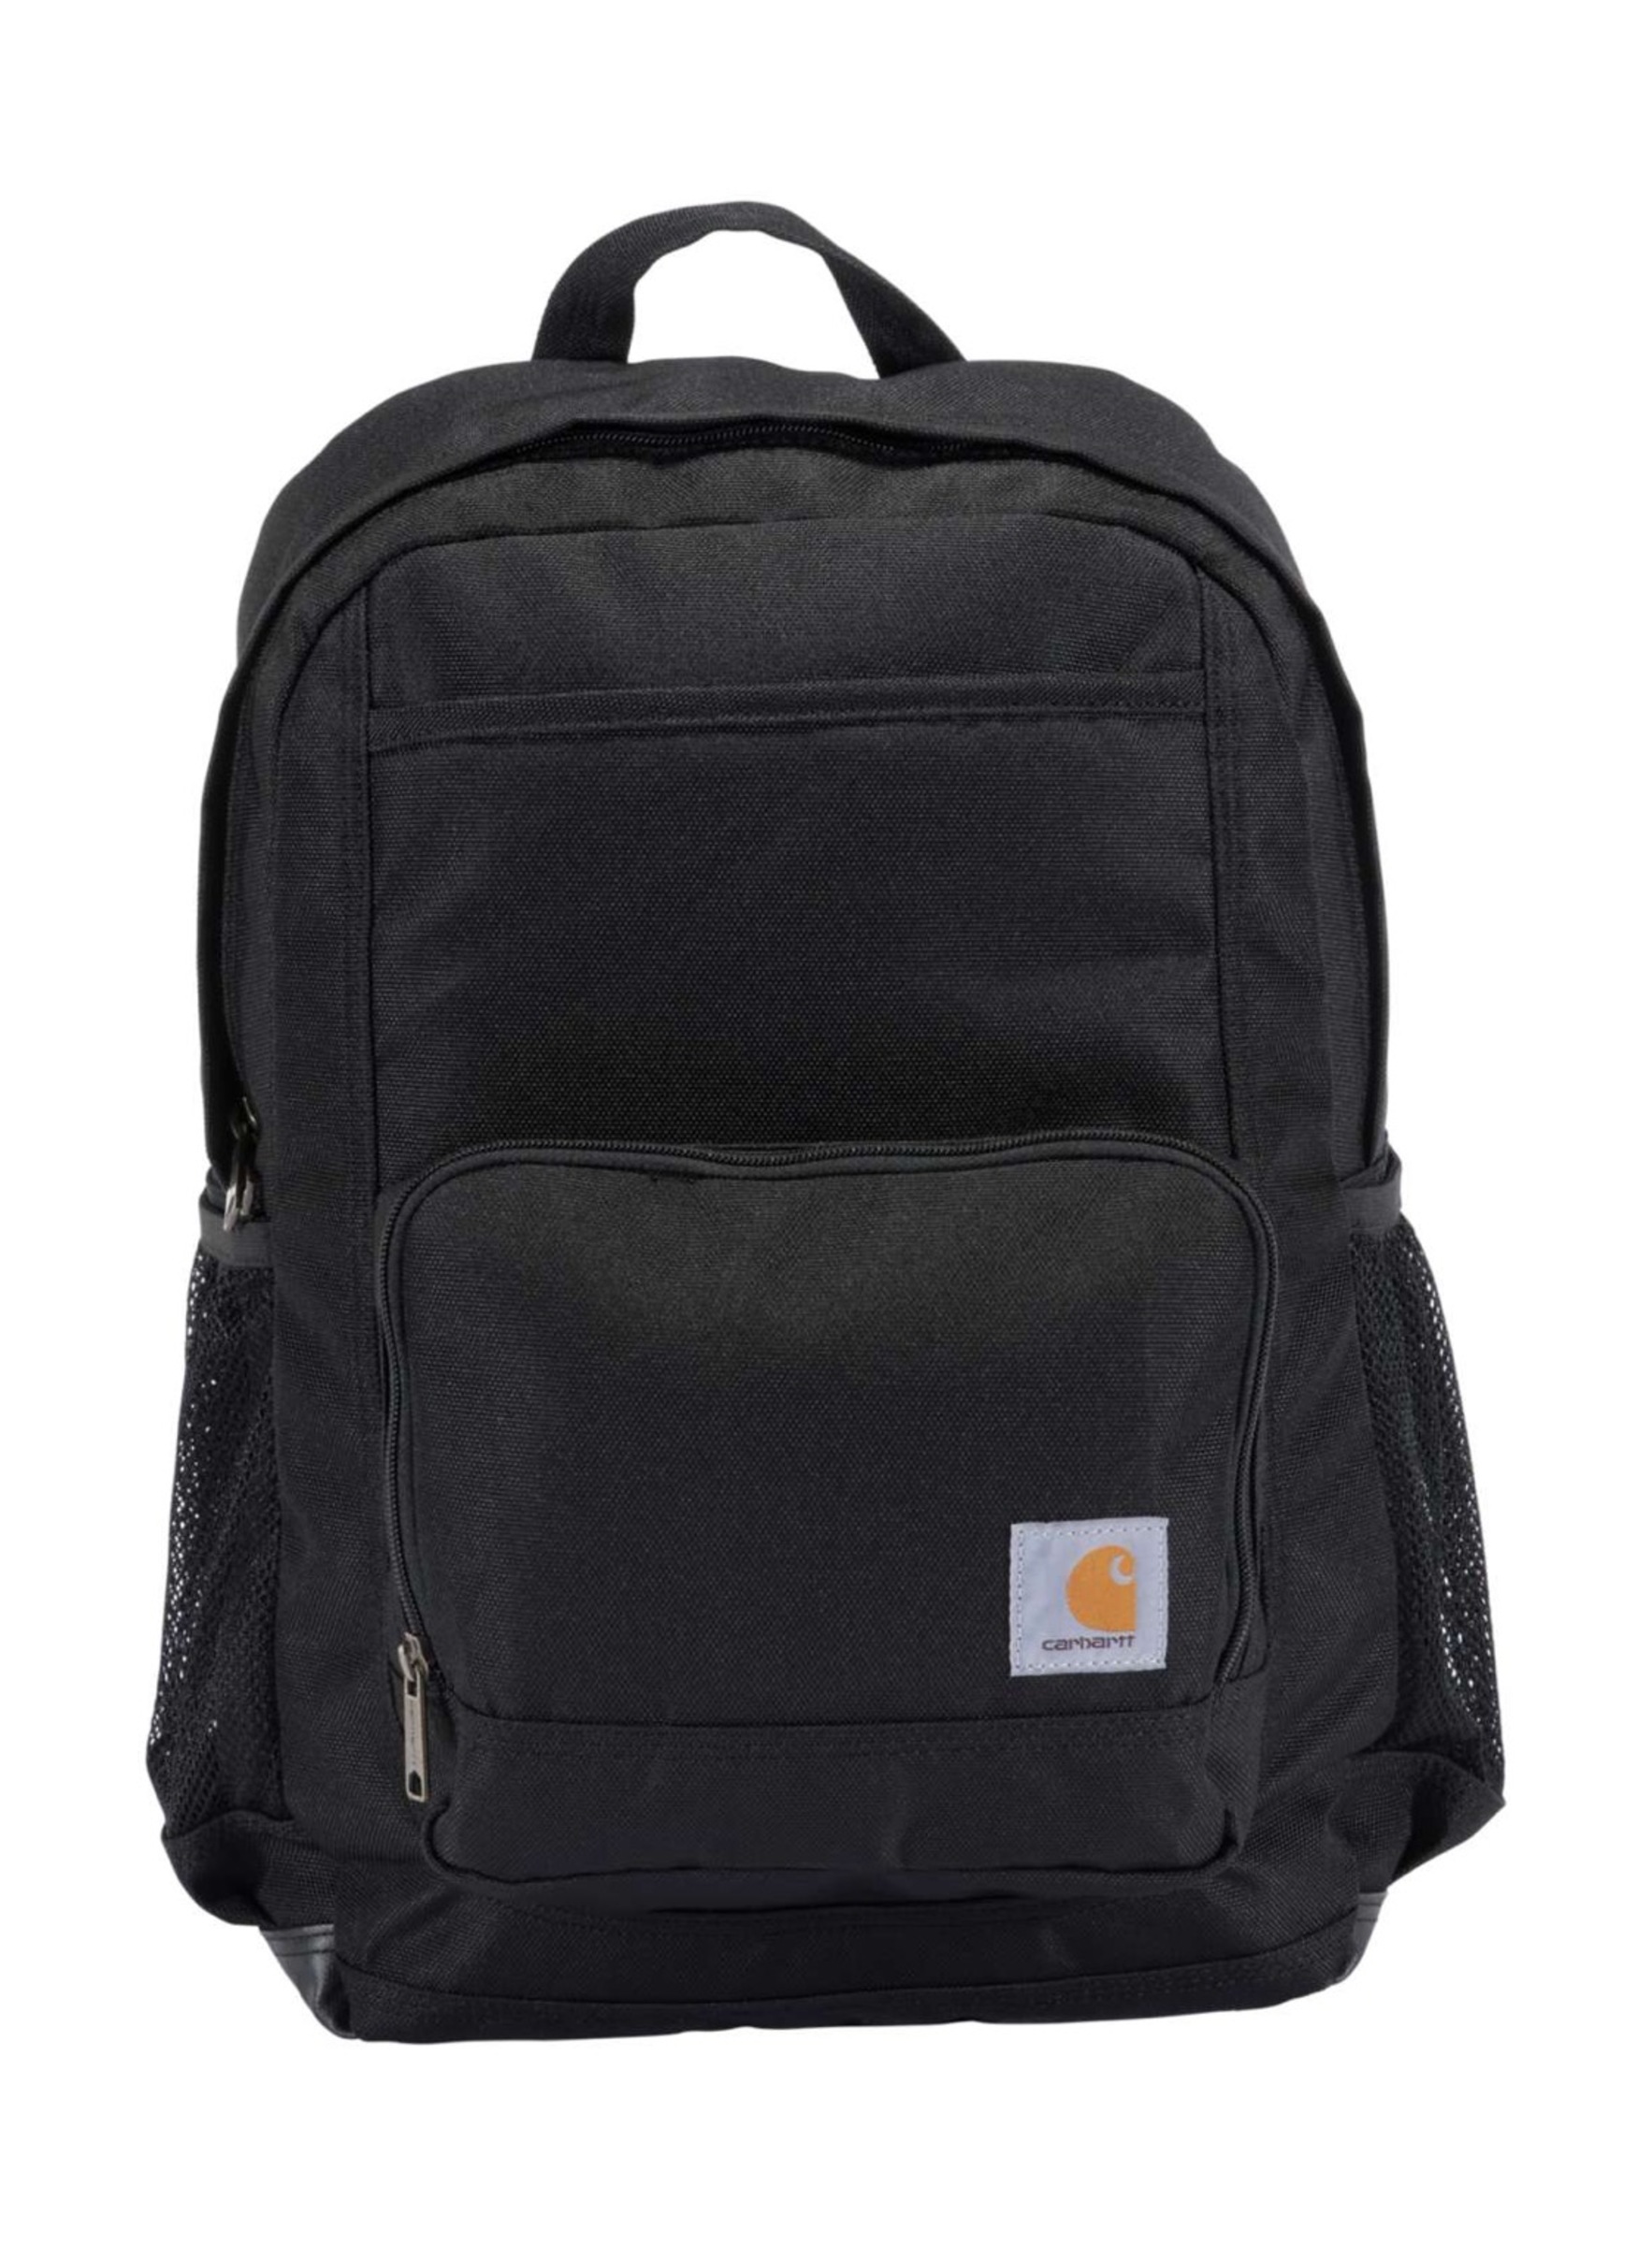 Carhartt 23L SINGLE-COMPARTMENT BACKPACK